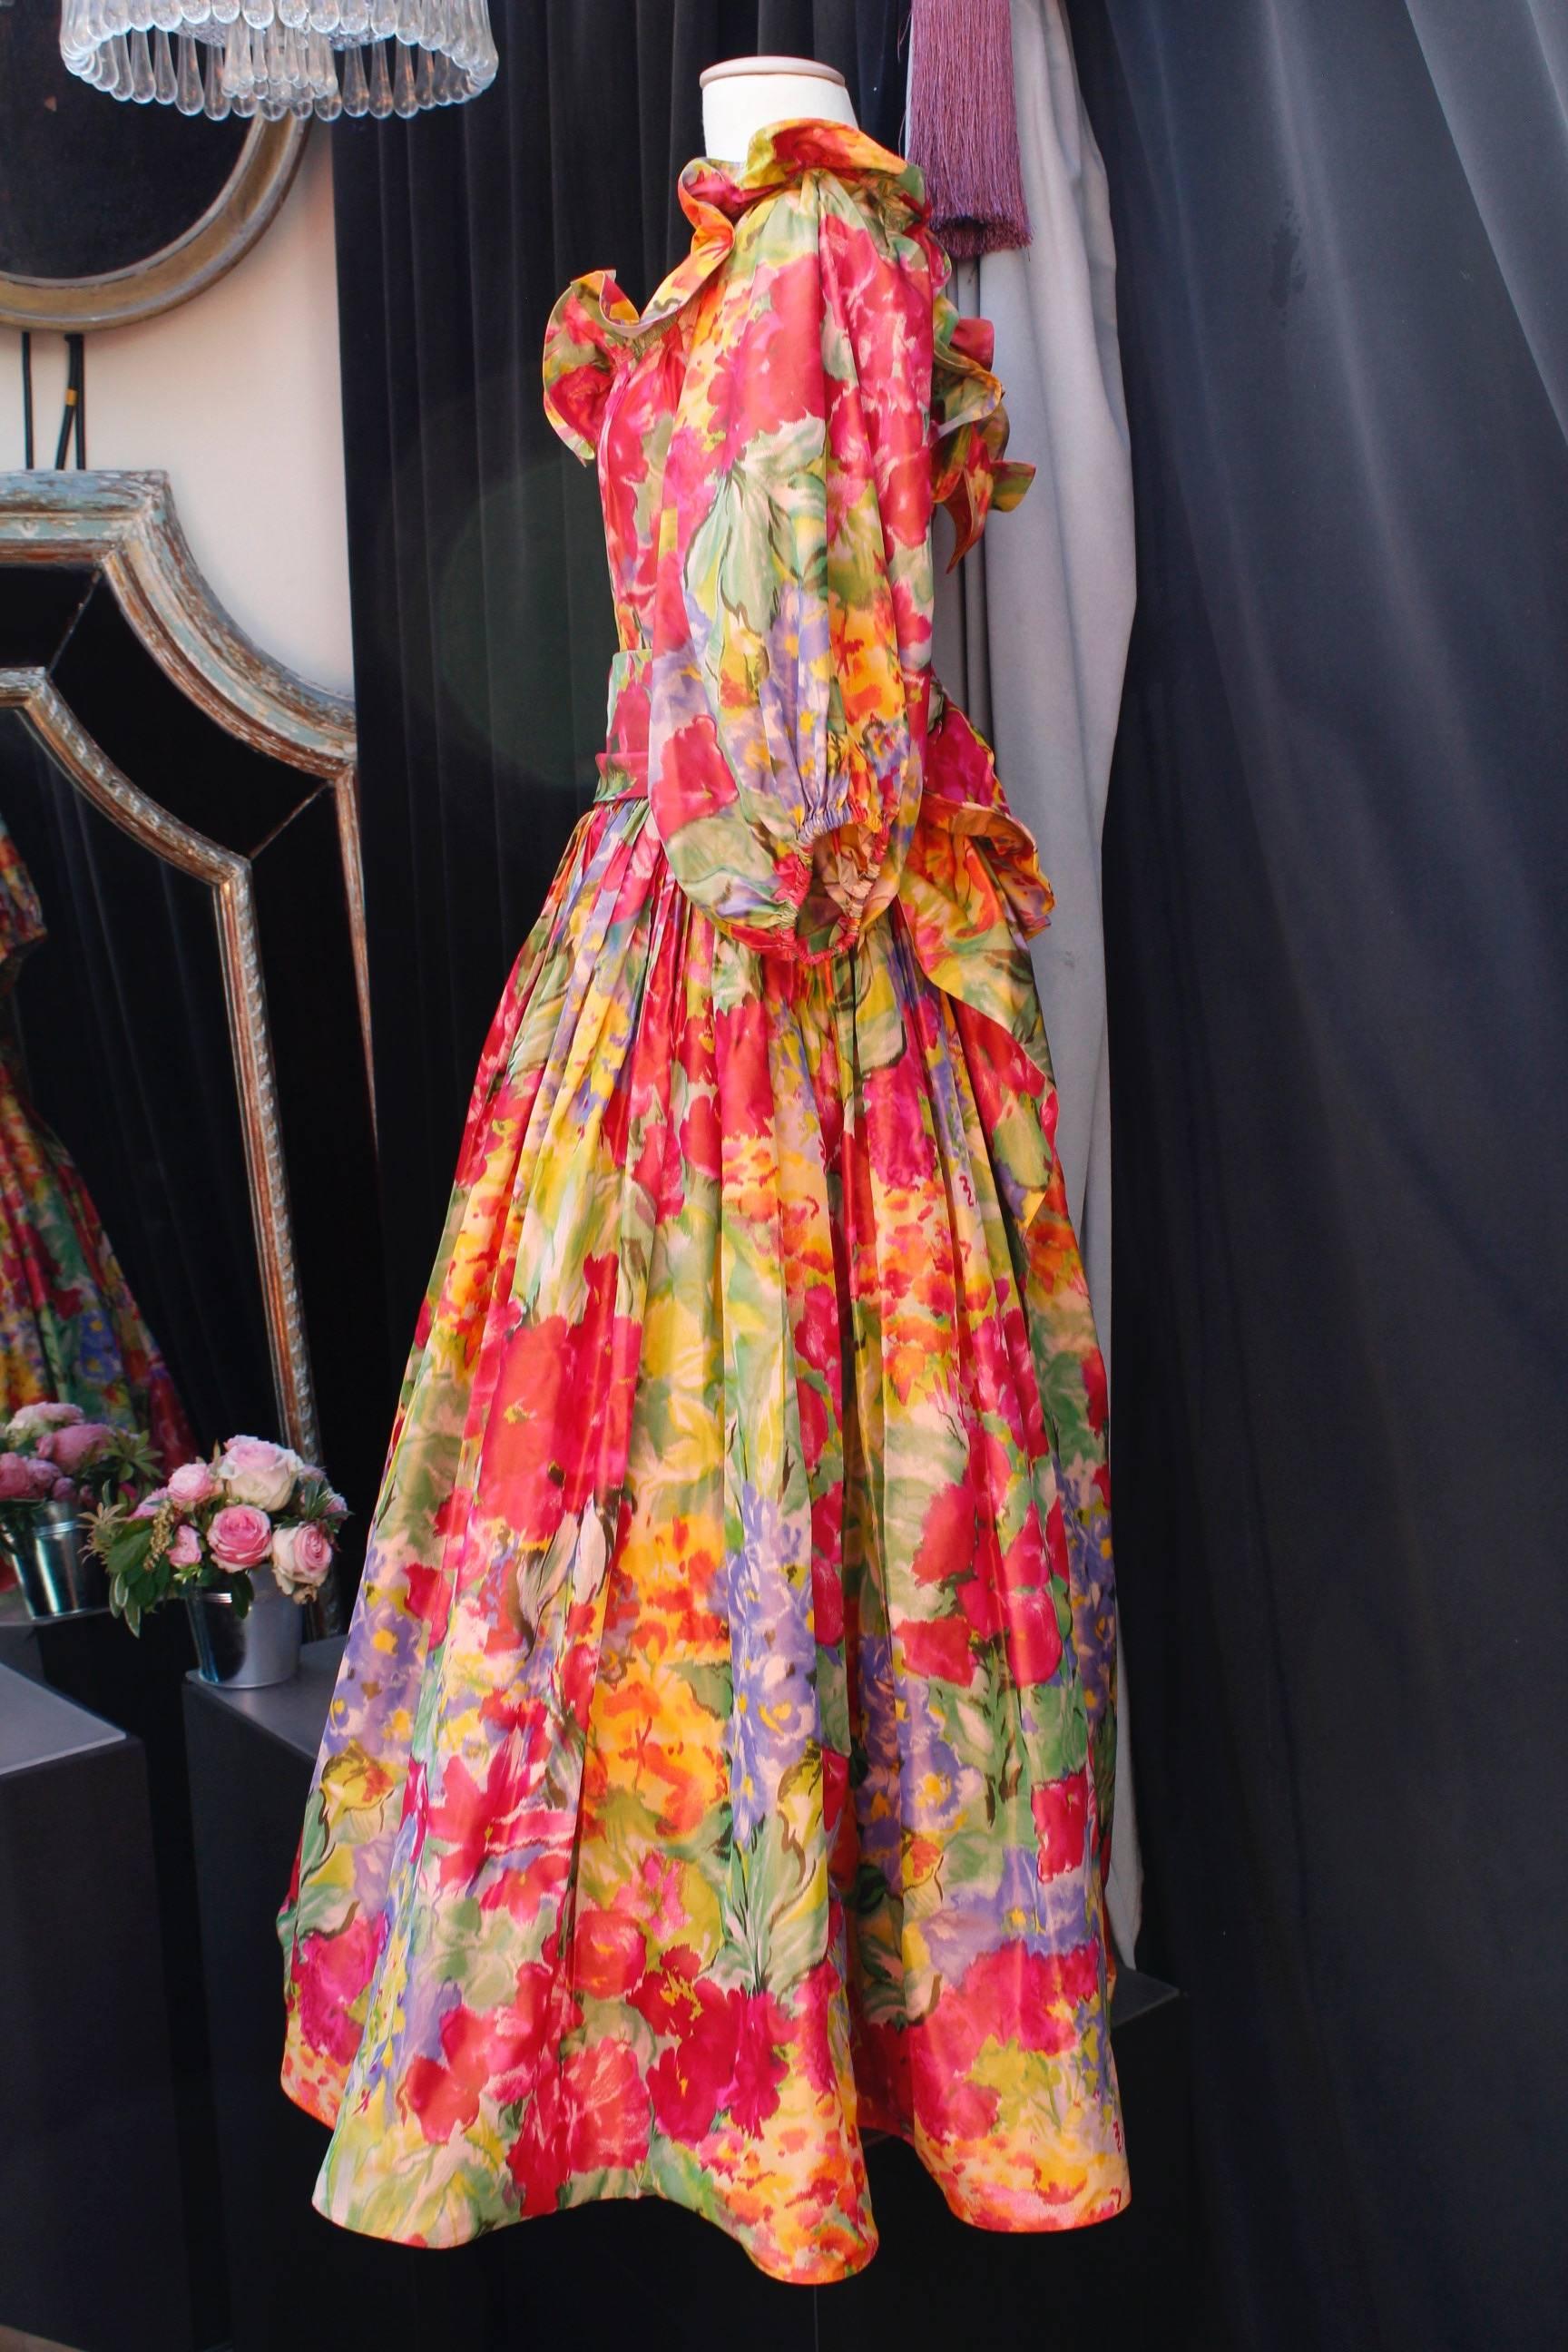 NINA RICCI – Attributed to ( Made in France ) – Stunning opera dress composed of silk taffeta with floral pattern print in red, yellow, green, purple and orange tones. The top features a boat neck underlined with a large flounce, and three-quarter